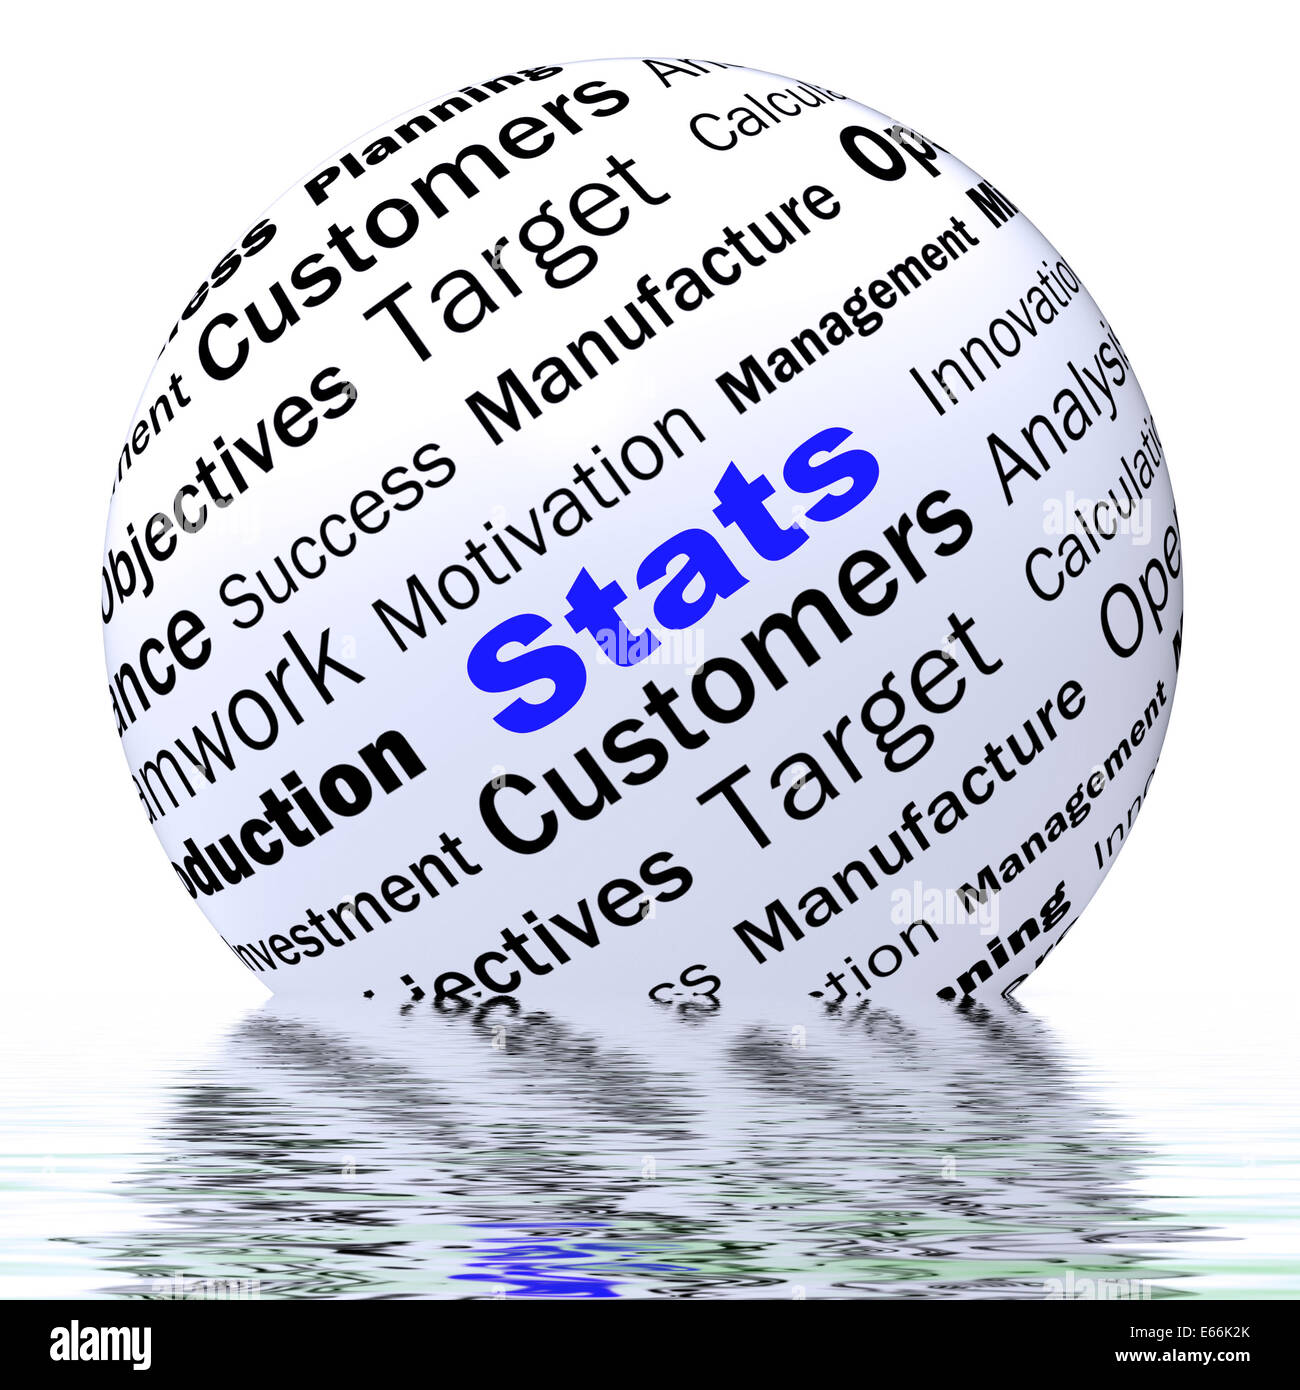 Stats Sphere Definition Displaying Business Reports Analysis And Figures Stock Photo